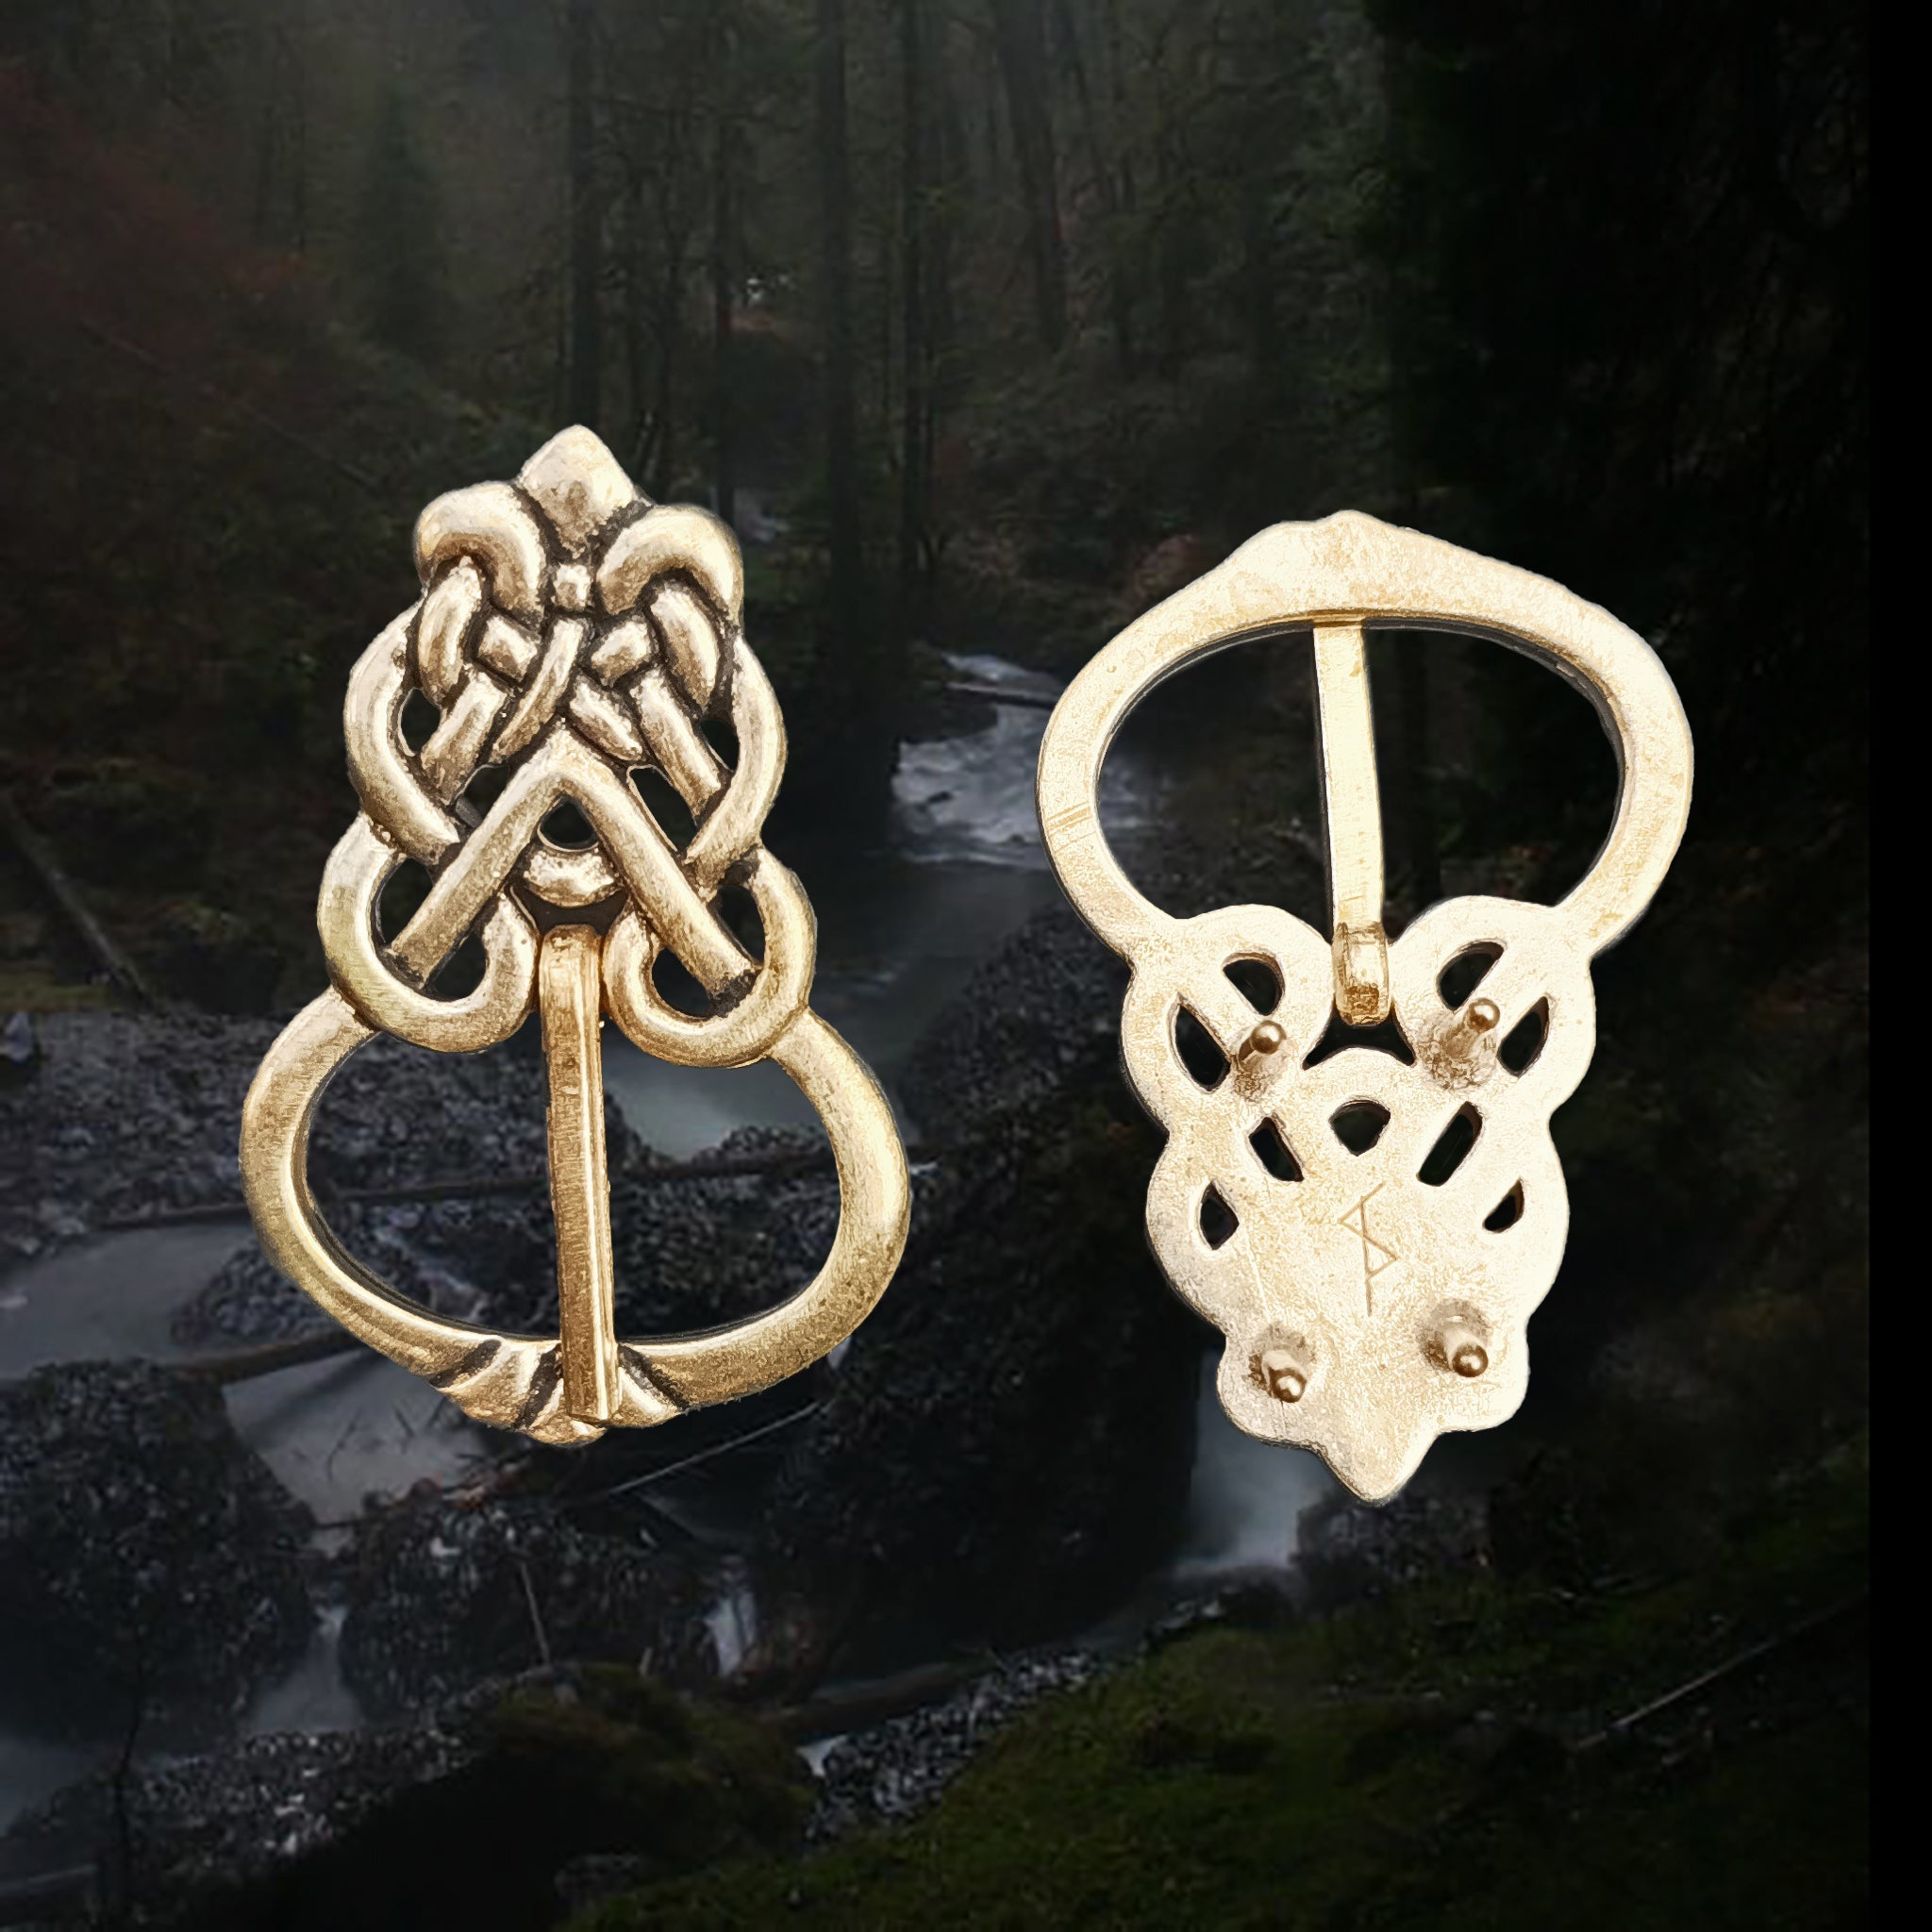 Bronze Ringerike Style Knotwork Viking Buckle - Front and Back